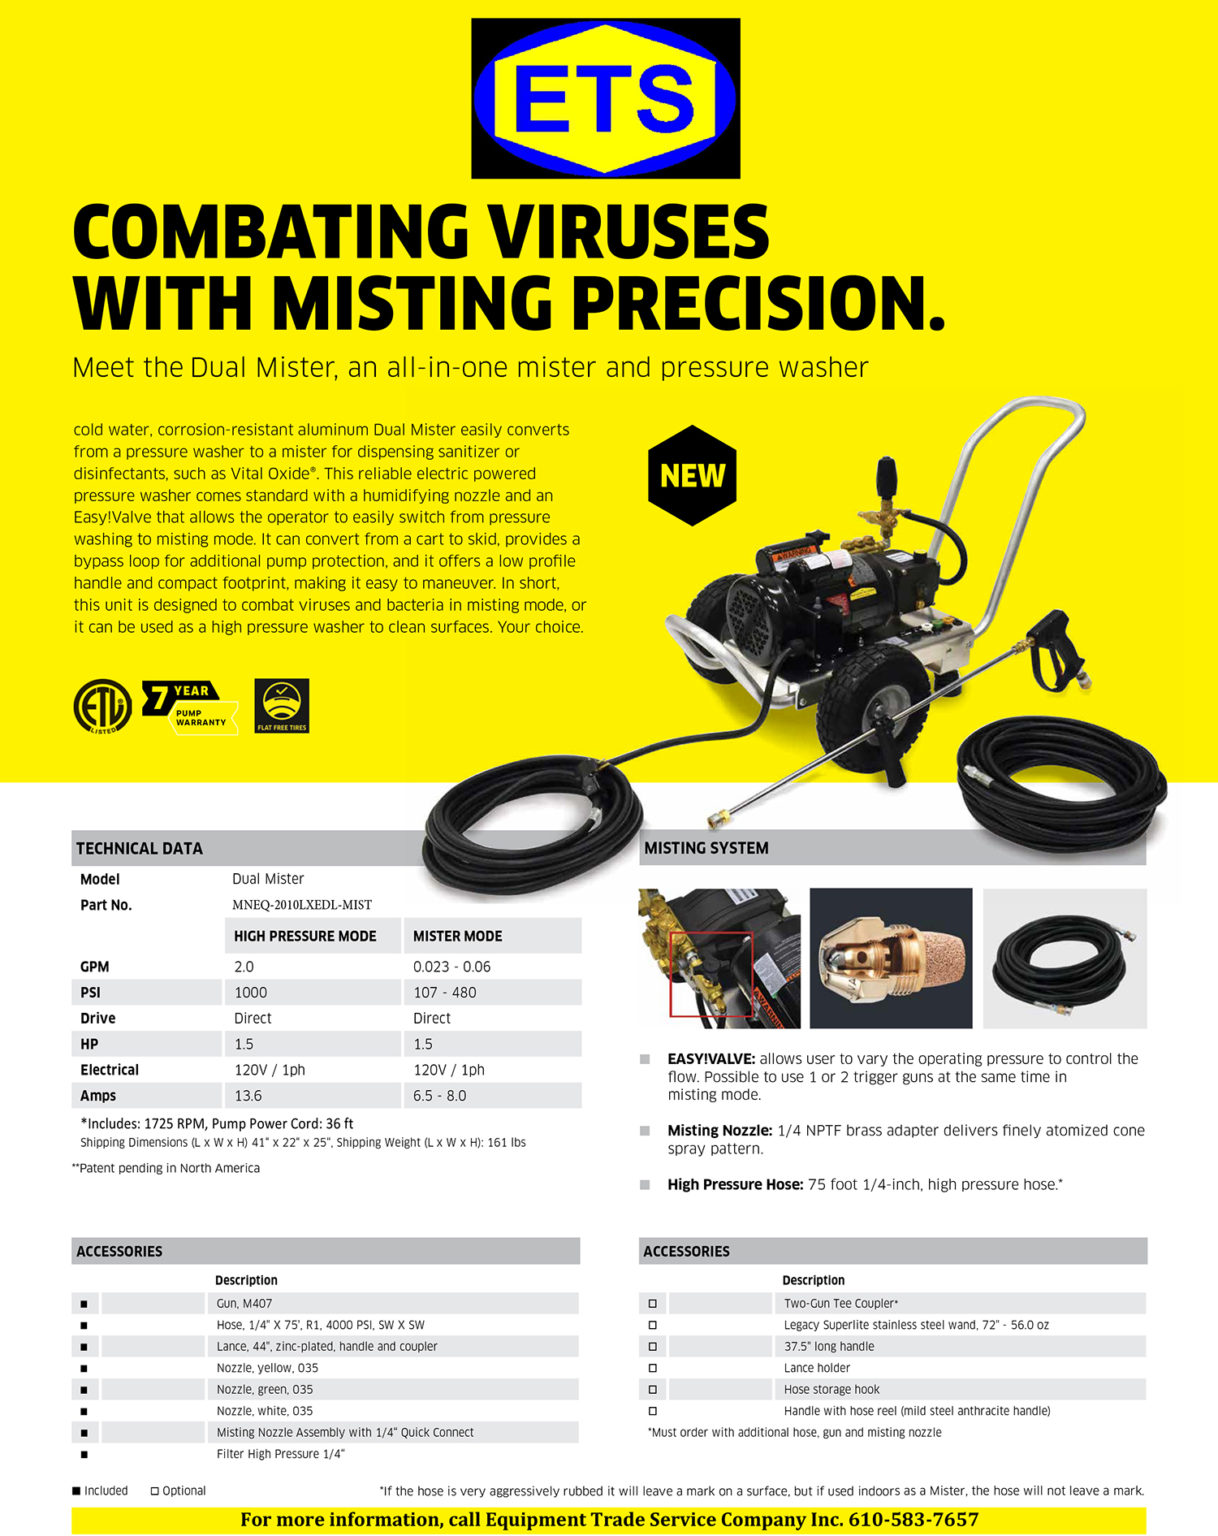 Combat Viruses and Germs like Covid19 with atomizing & misting ETS